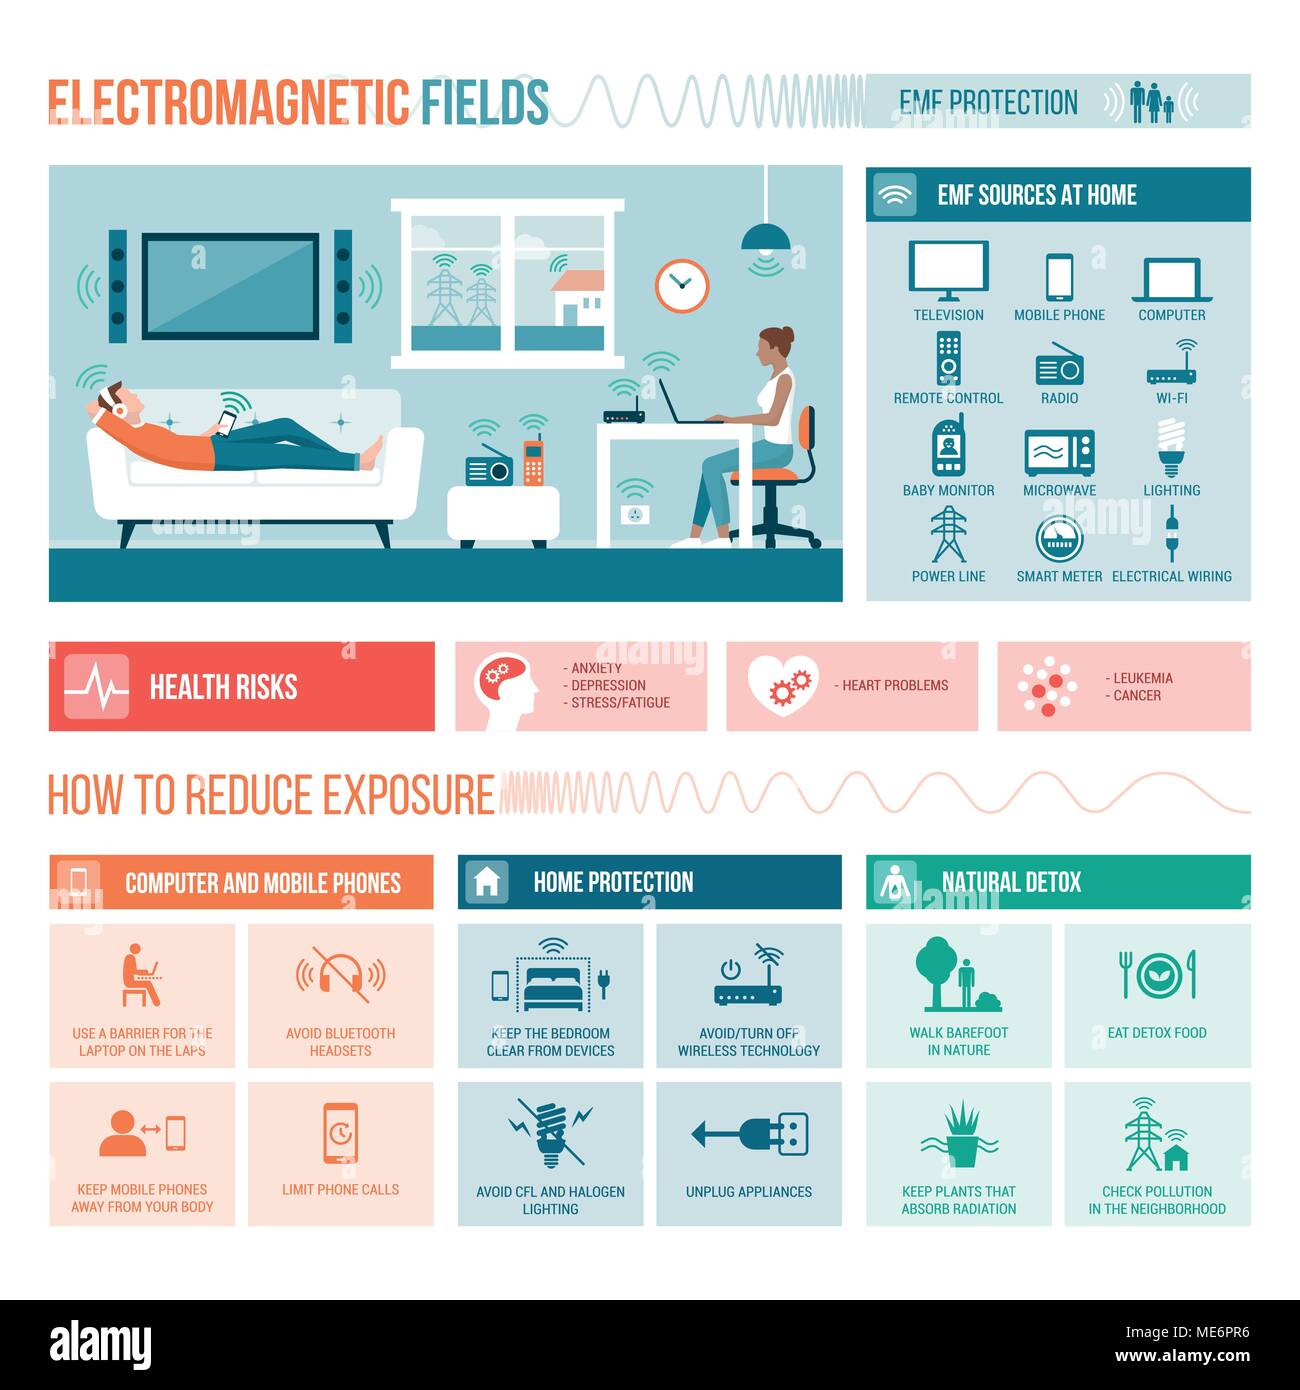 Electromagnetic fields in the home, sources, effects on health and protection, vector infographic with icons Stock Vector